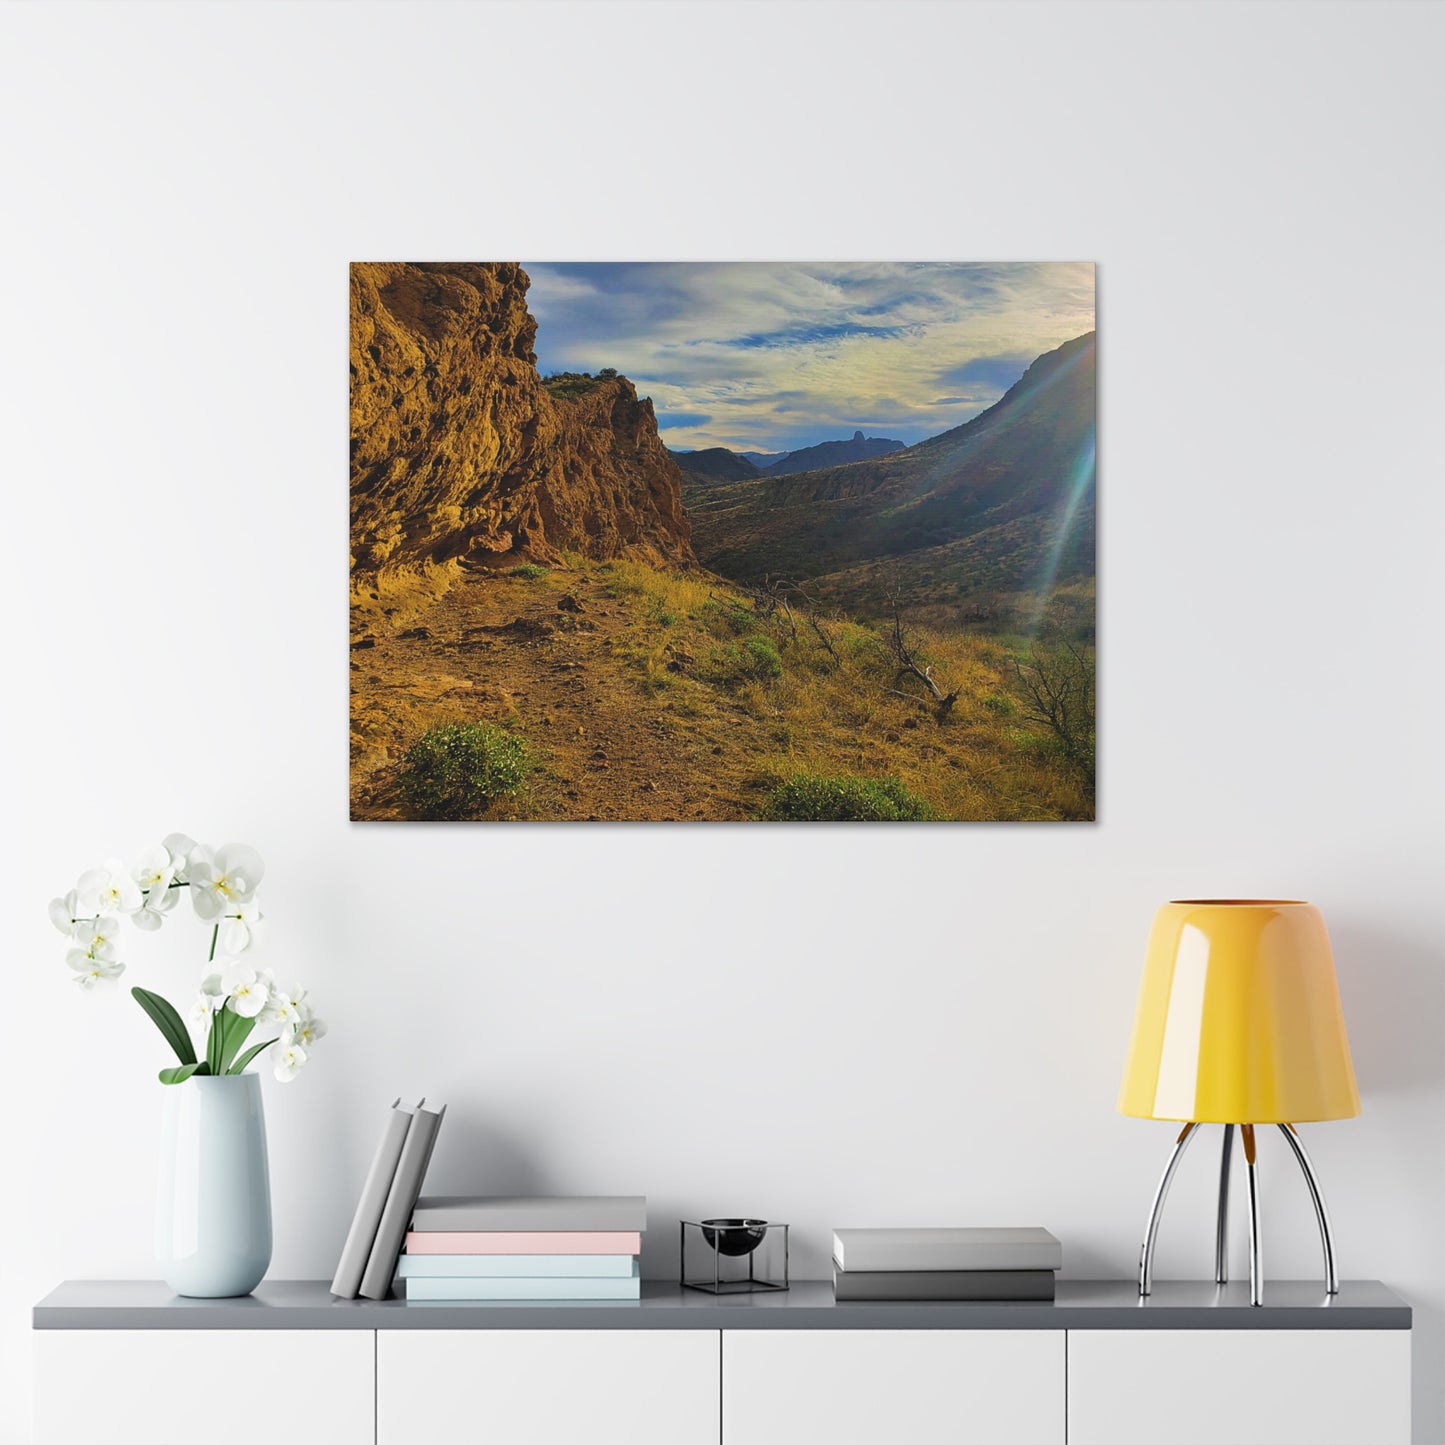 Canvas Gallery Wrap: Rocks and Sunbeams; Arizona Photography, Wall Art, Natural Landscape Home Decor for Hikers and Nature Lovers!